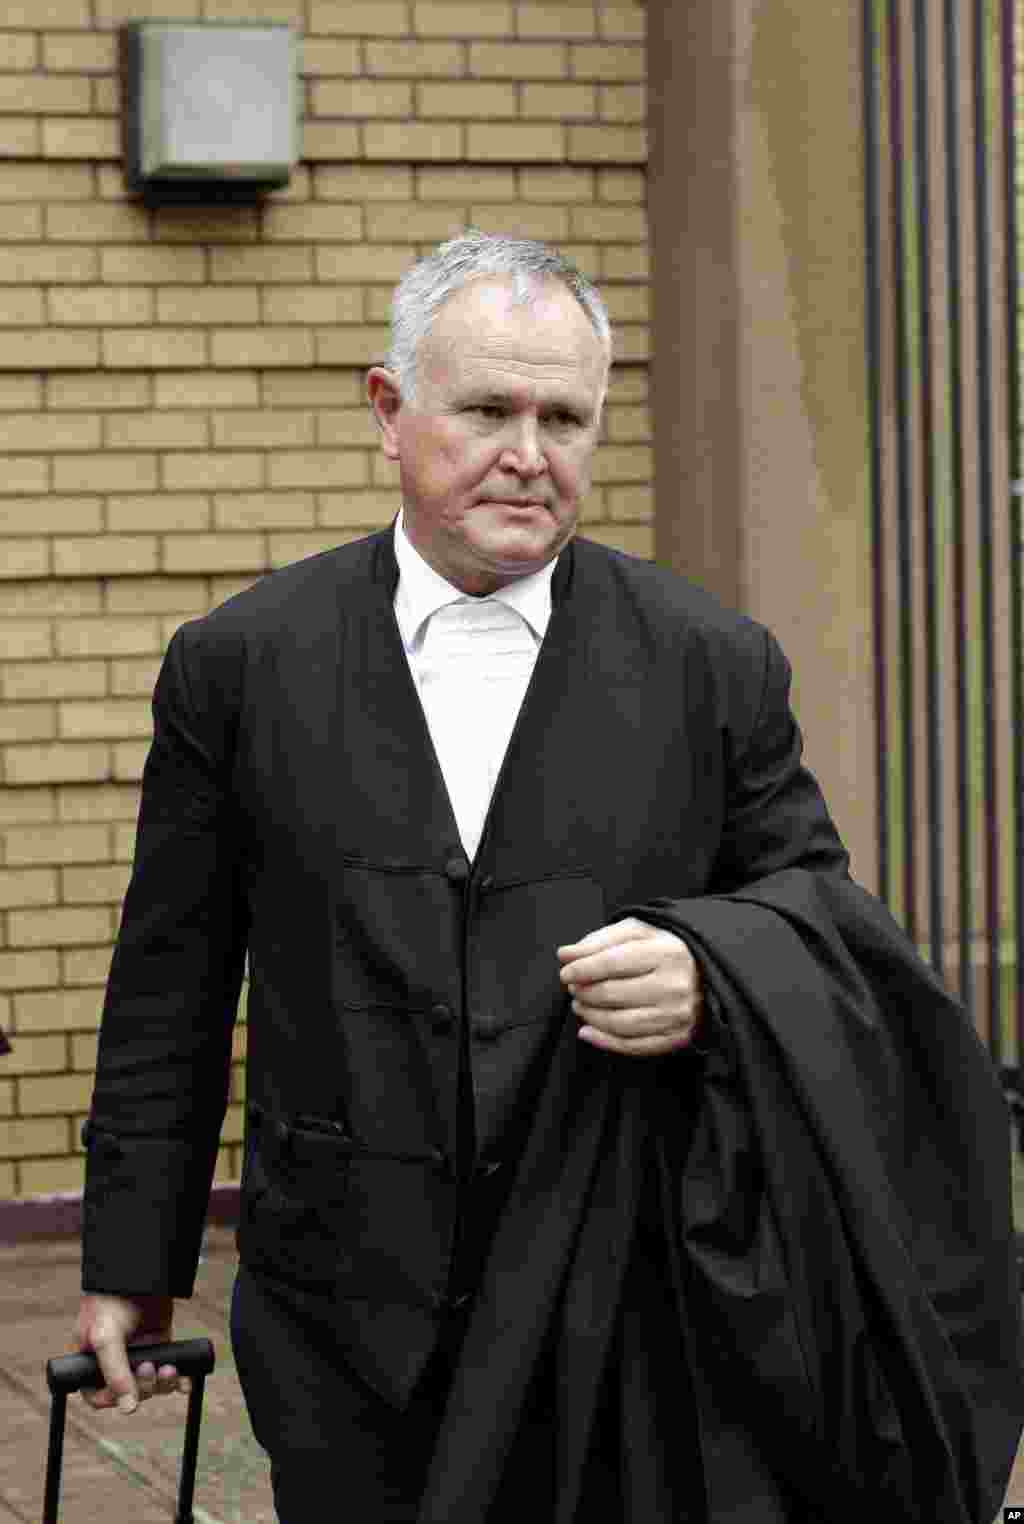 Oscar Pistorius&#39;s lawyer, Barry Roux, arrives at the high court in Pretoria. The State Prosecutor Gerrie Nel presented arguments in the case against Pistorius, who was acquitted of murder for killing girlfriend Reeva Steenkamp, South Africa, Dec. 9, 2014. &nbsp;